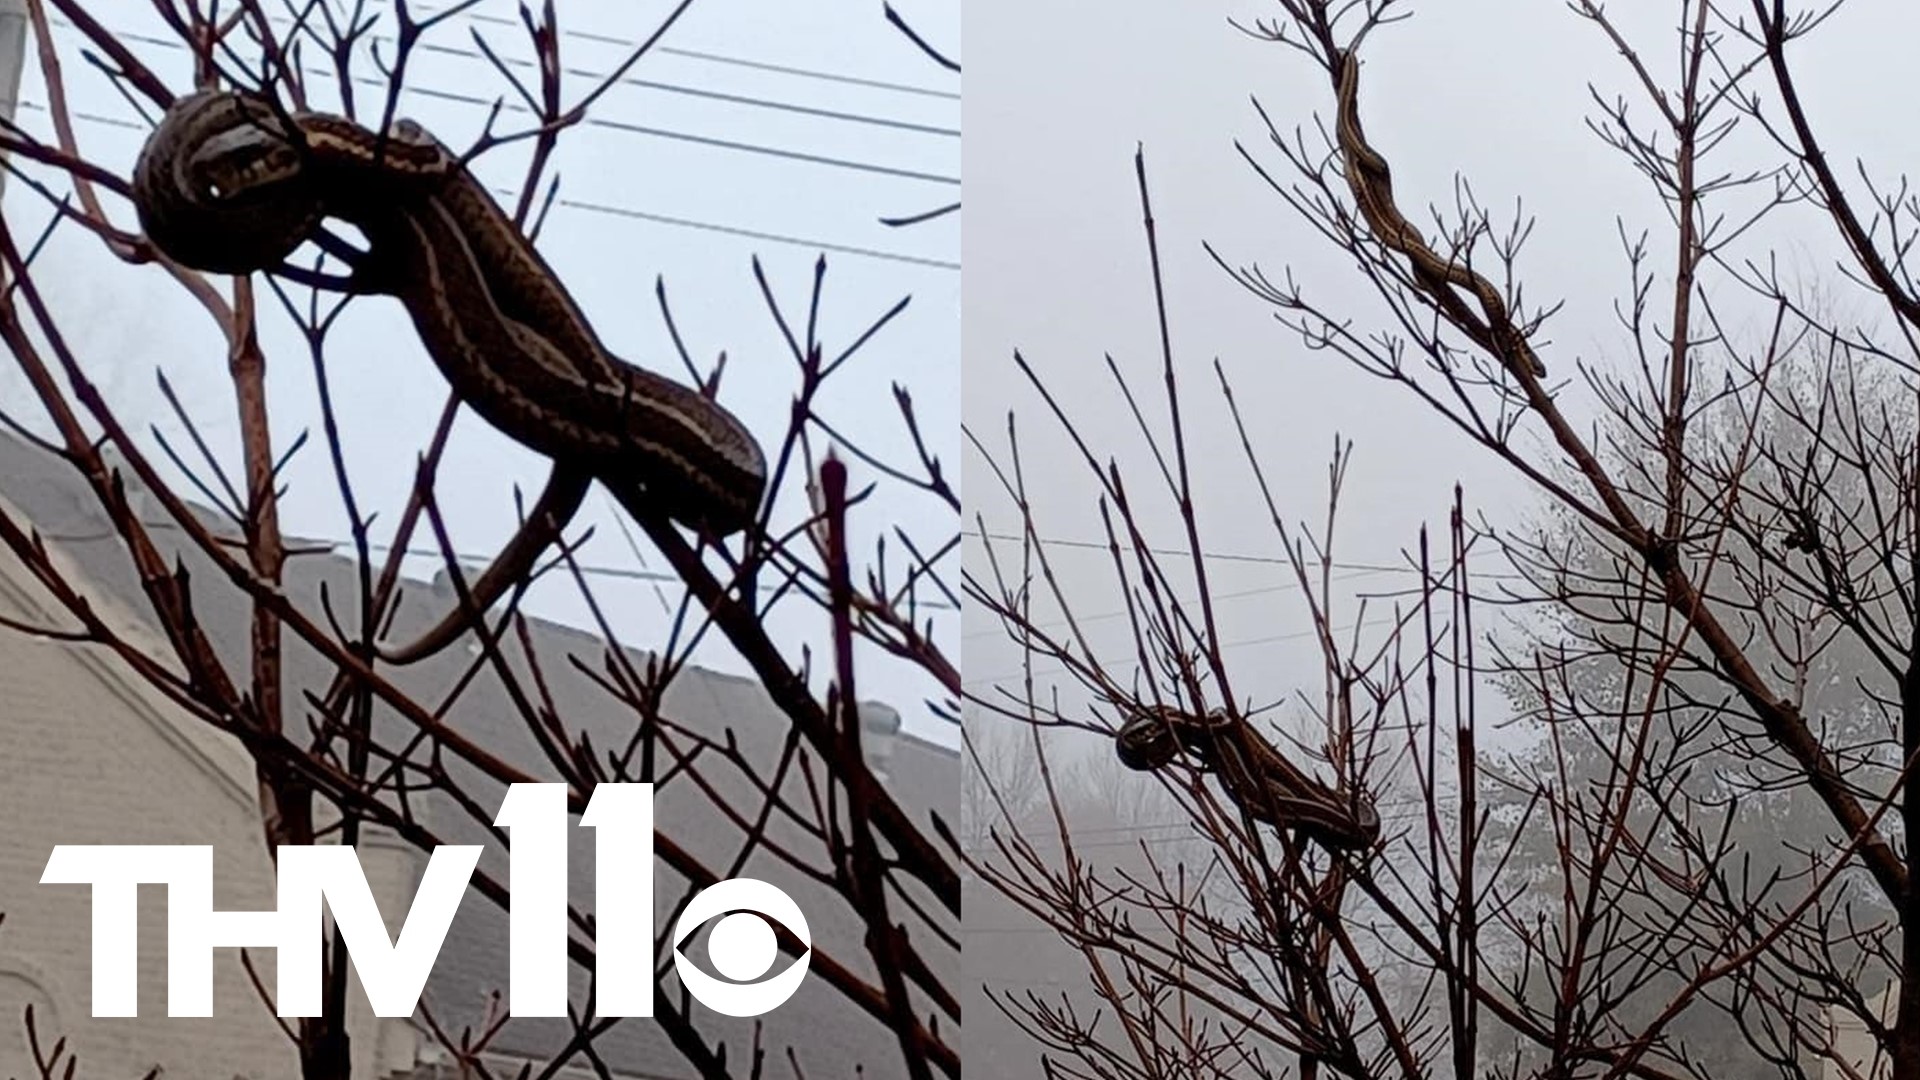 Rodney Cooper snapped these photos in Dell of two snakes in his tree. Four hours later they had wandered off somewhere else.